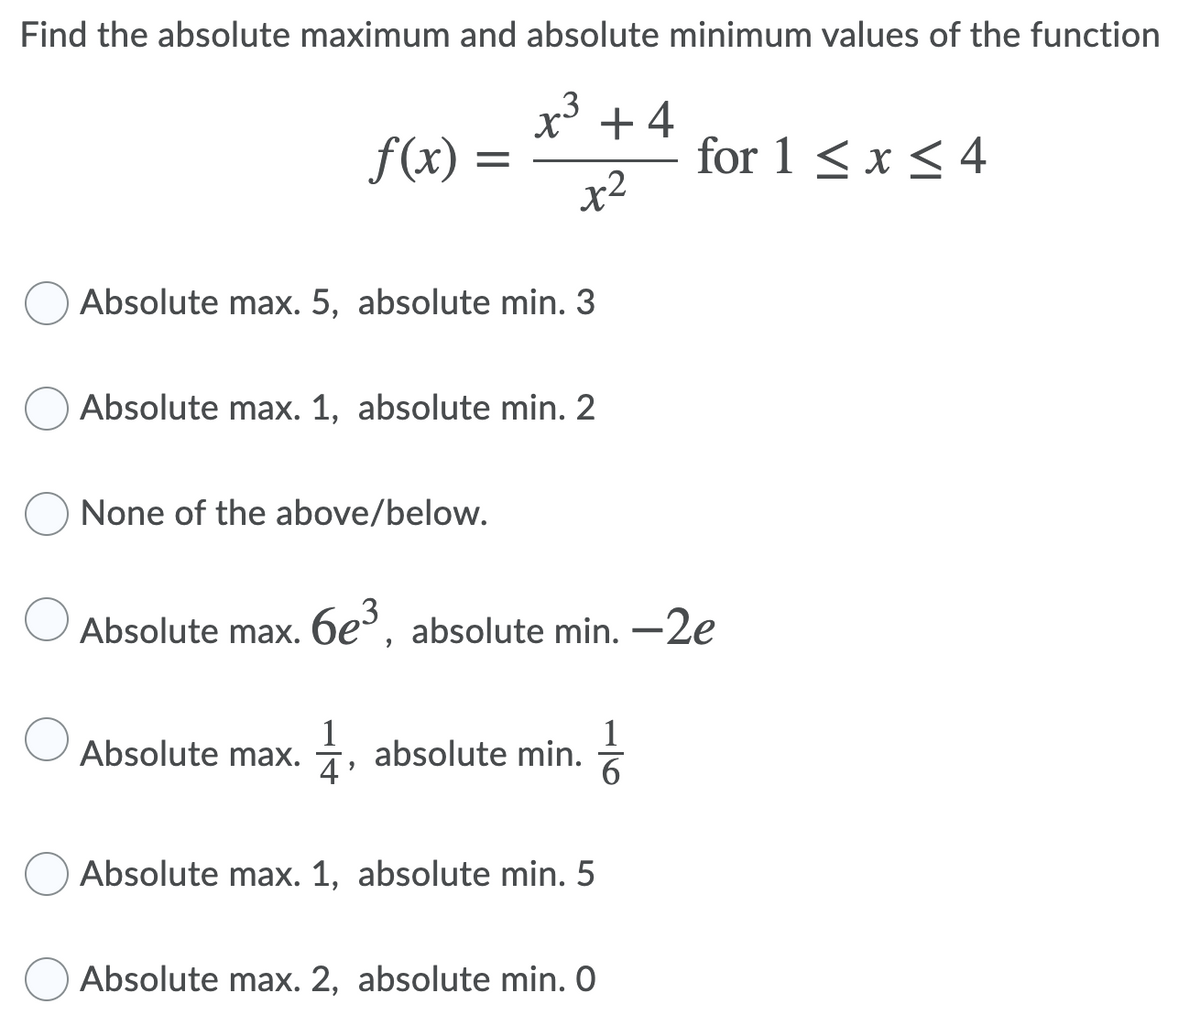 Find the absolute maximum and absolute minimum values of the function
x³ + 4
f(x) :
for 1 < x < 4
x2
Absolute max. 5, absolute min. 3
Absolute max. 1, absolute min. 2
None of the above/below.
Absolute max. 6e³, absolute min. -2e
1
Absolute max.
1
+, absolute min.
6.
Absolute max. 1, absolute min. 5
Absolute max. 2, absolute min. O
